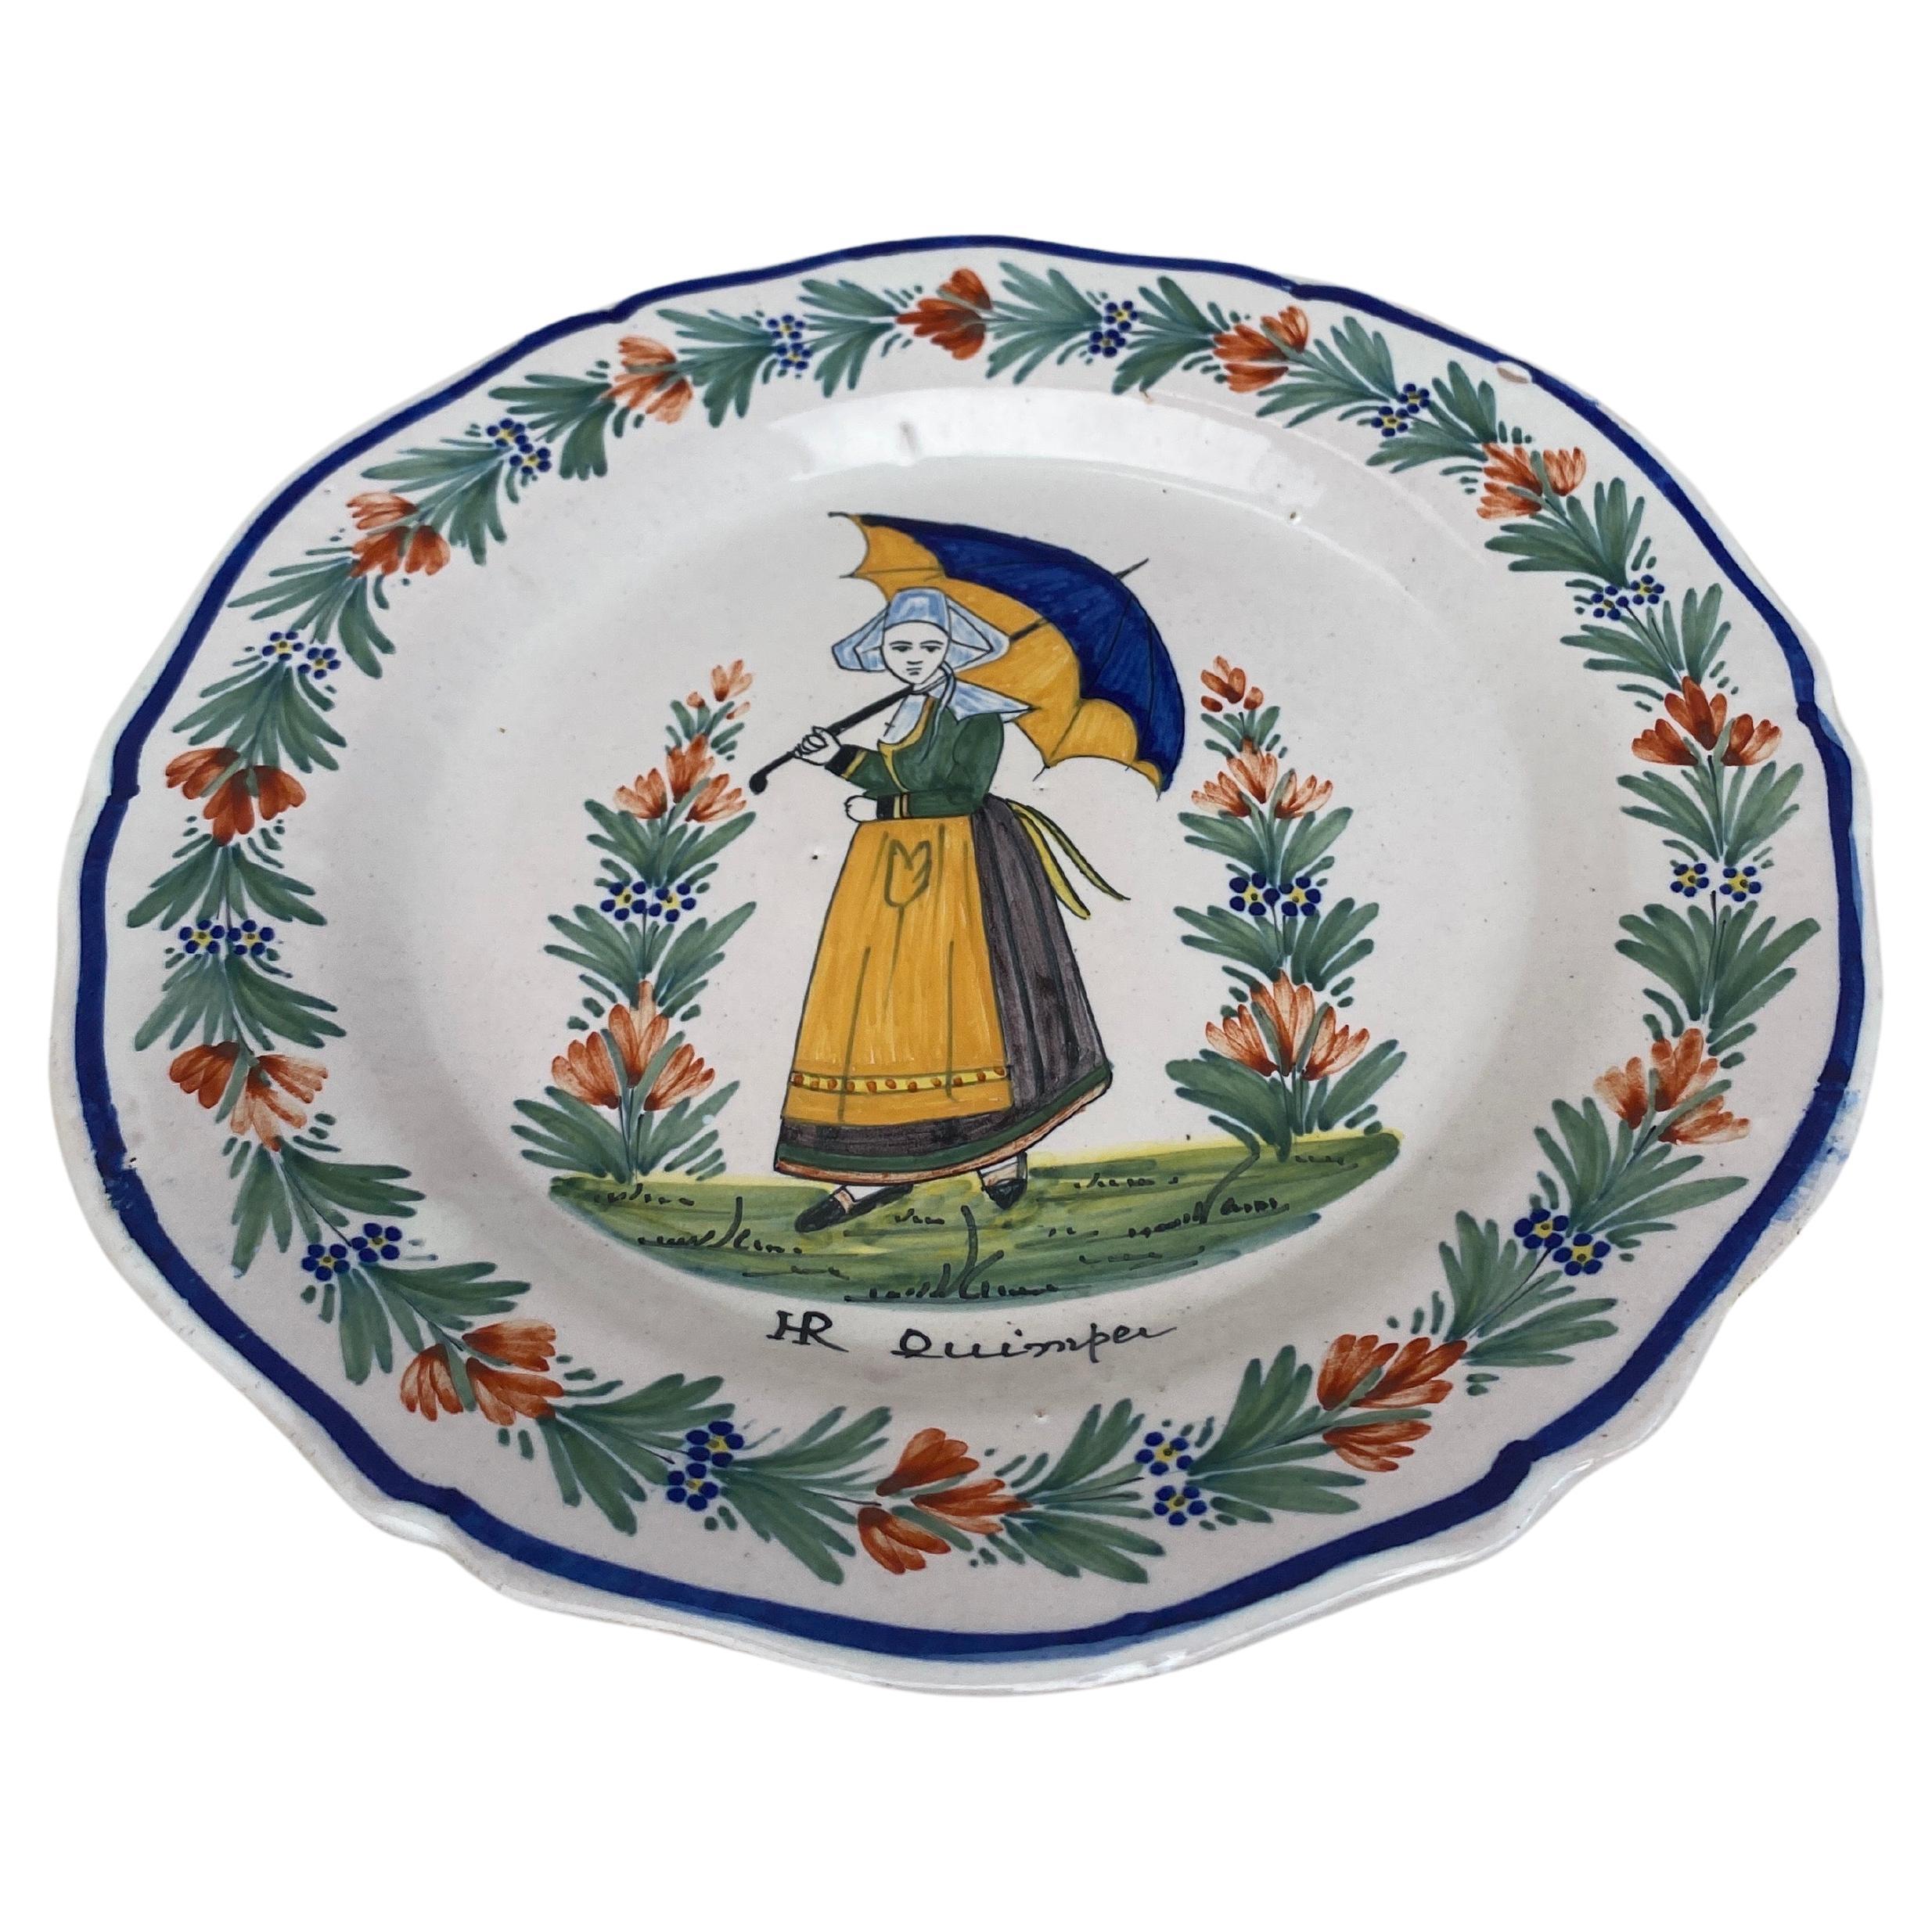 A French faience plate with a farmer with an umbrella signed HR Quimper, circa 1890
border of flowers.
 